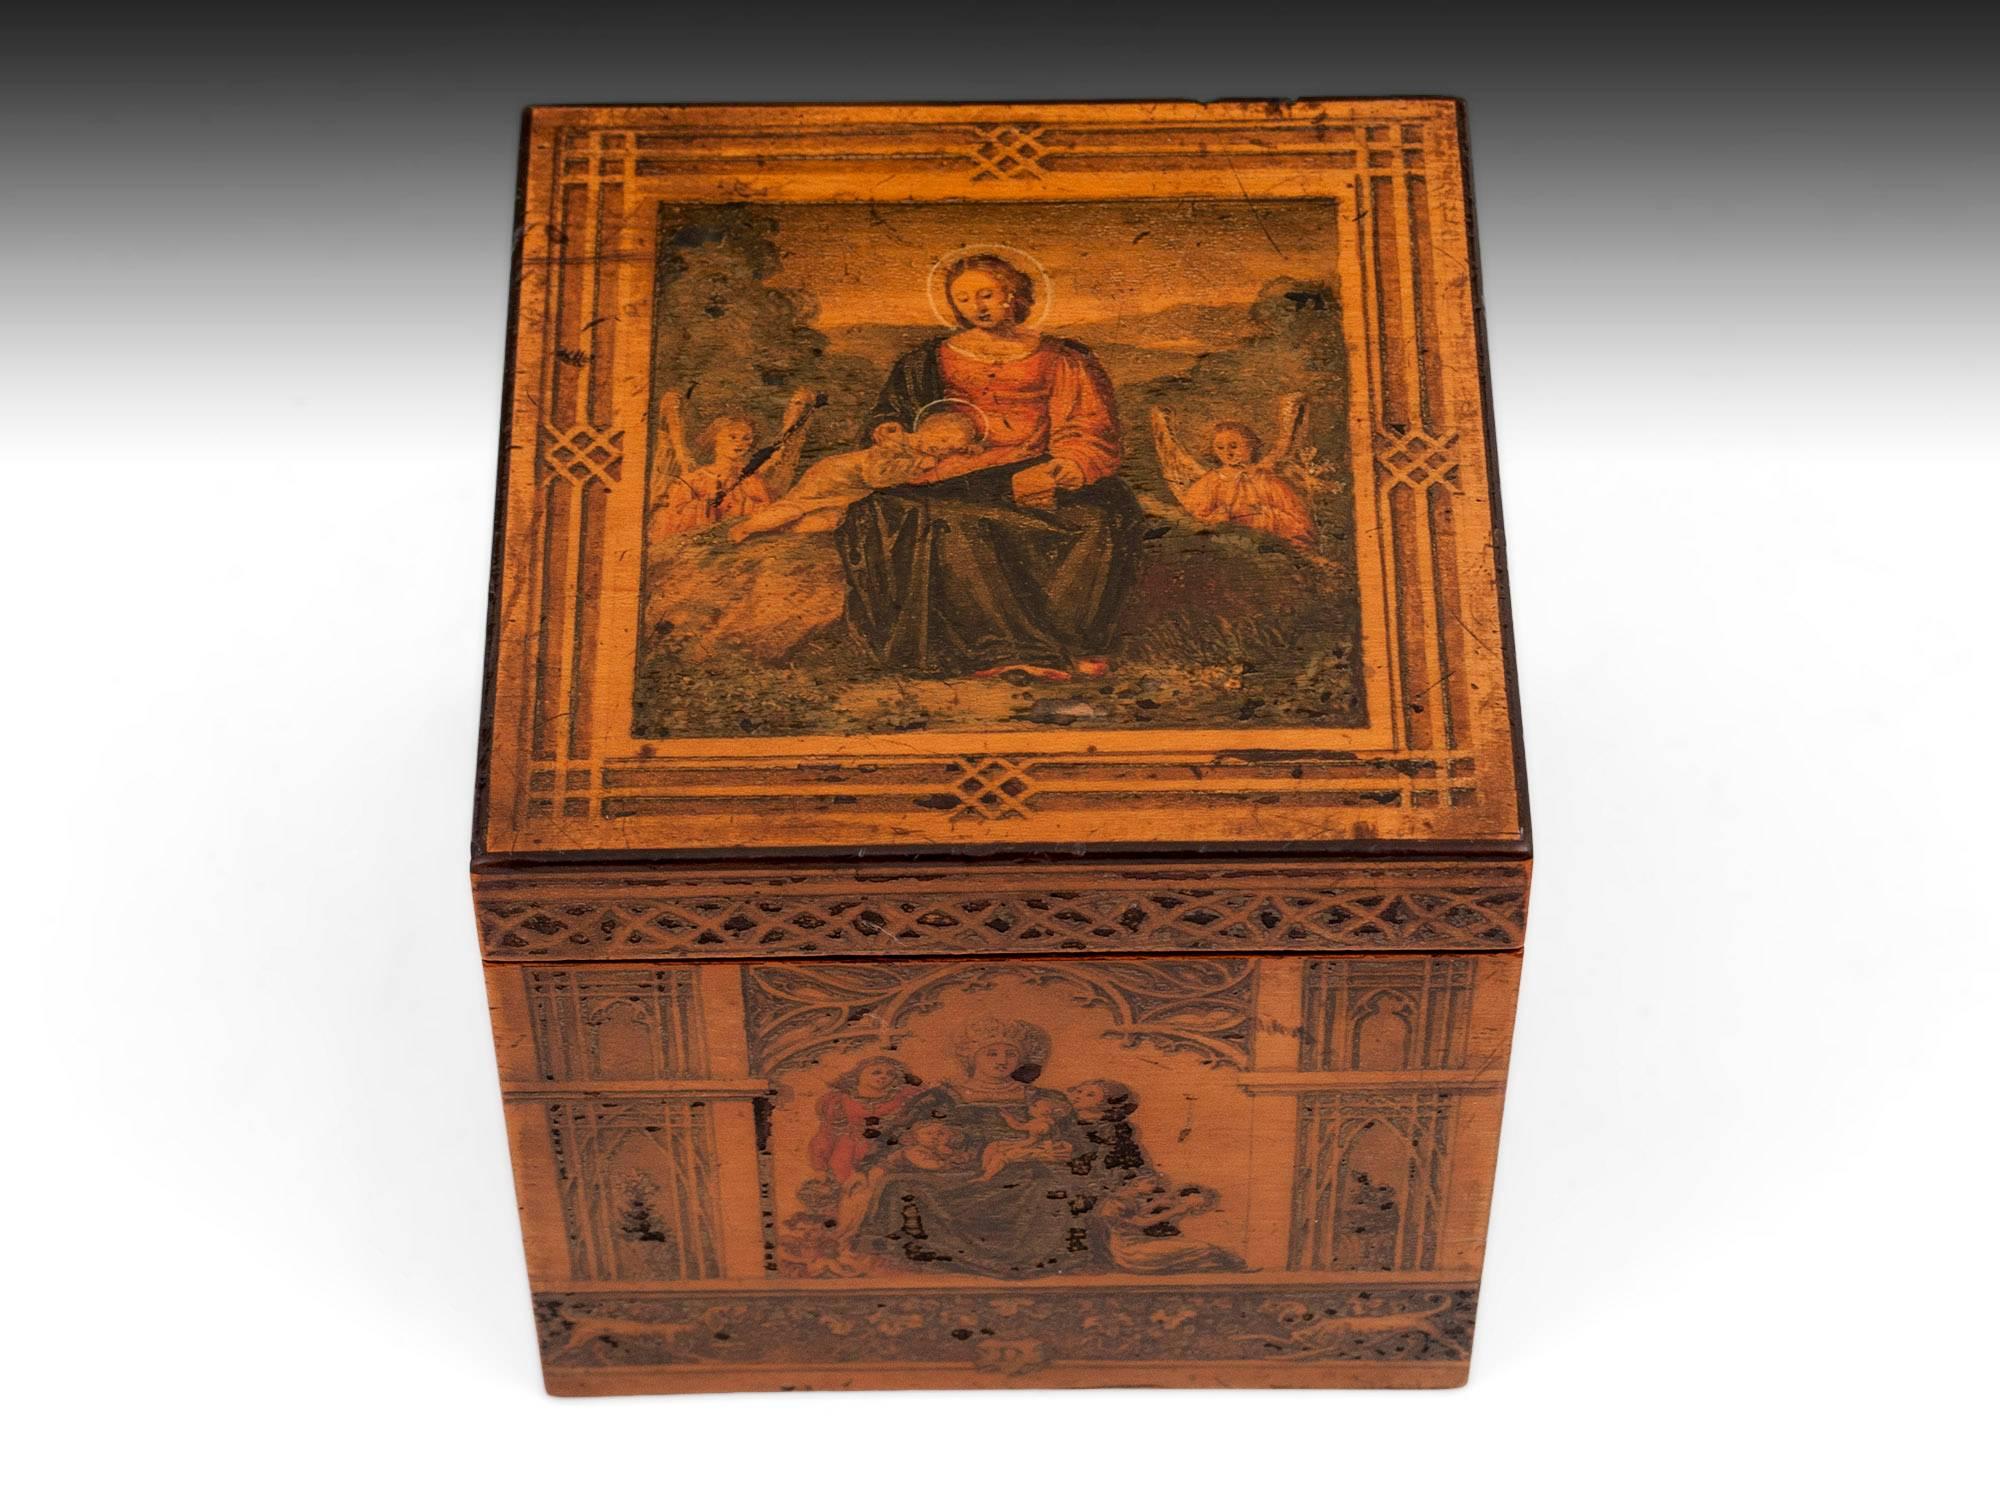 Antique tea caddy with each side finely painted depicting various scenes of angels and other religious iconography.